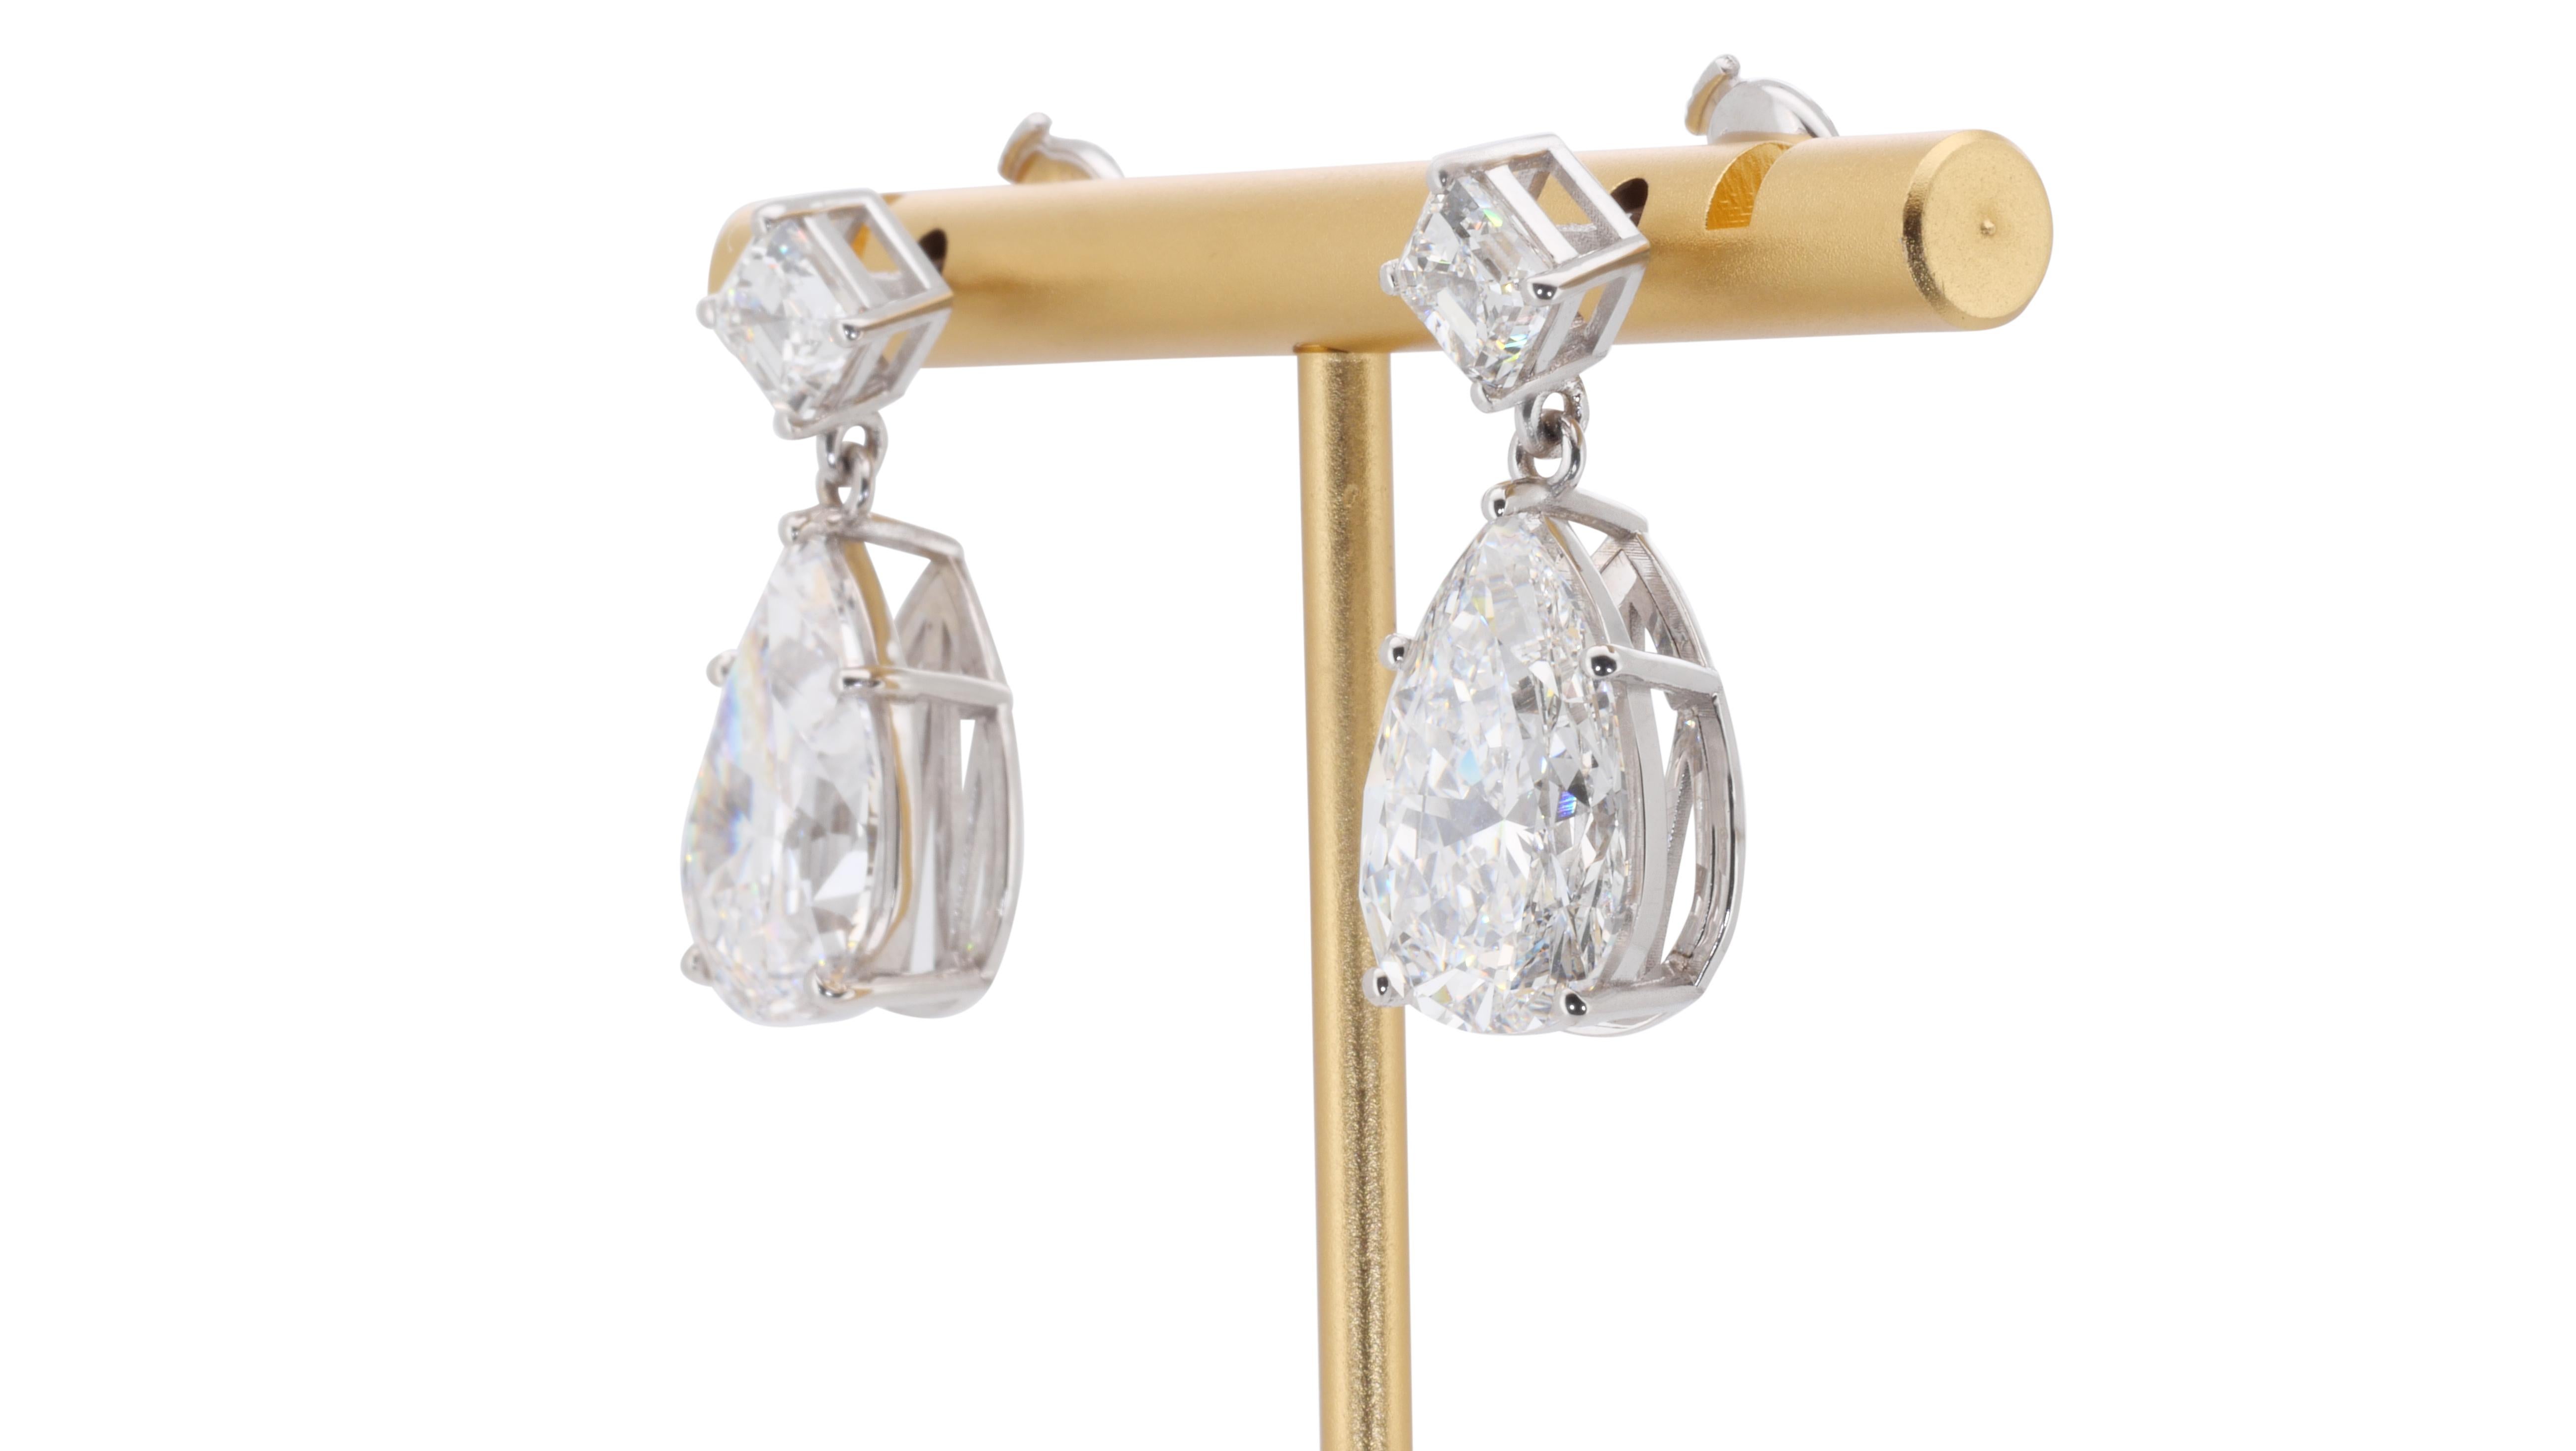 Dazzling 18k White Gold Earrings w/ 14.19 Carat Natural Diamonds GIA Certificate For Sale 2